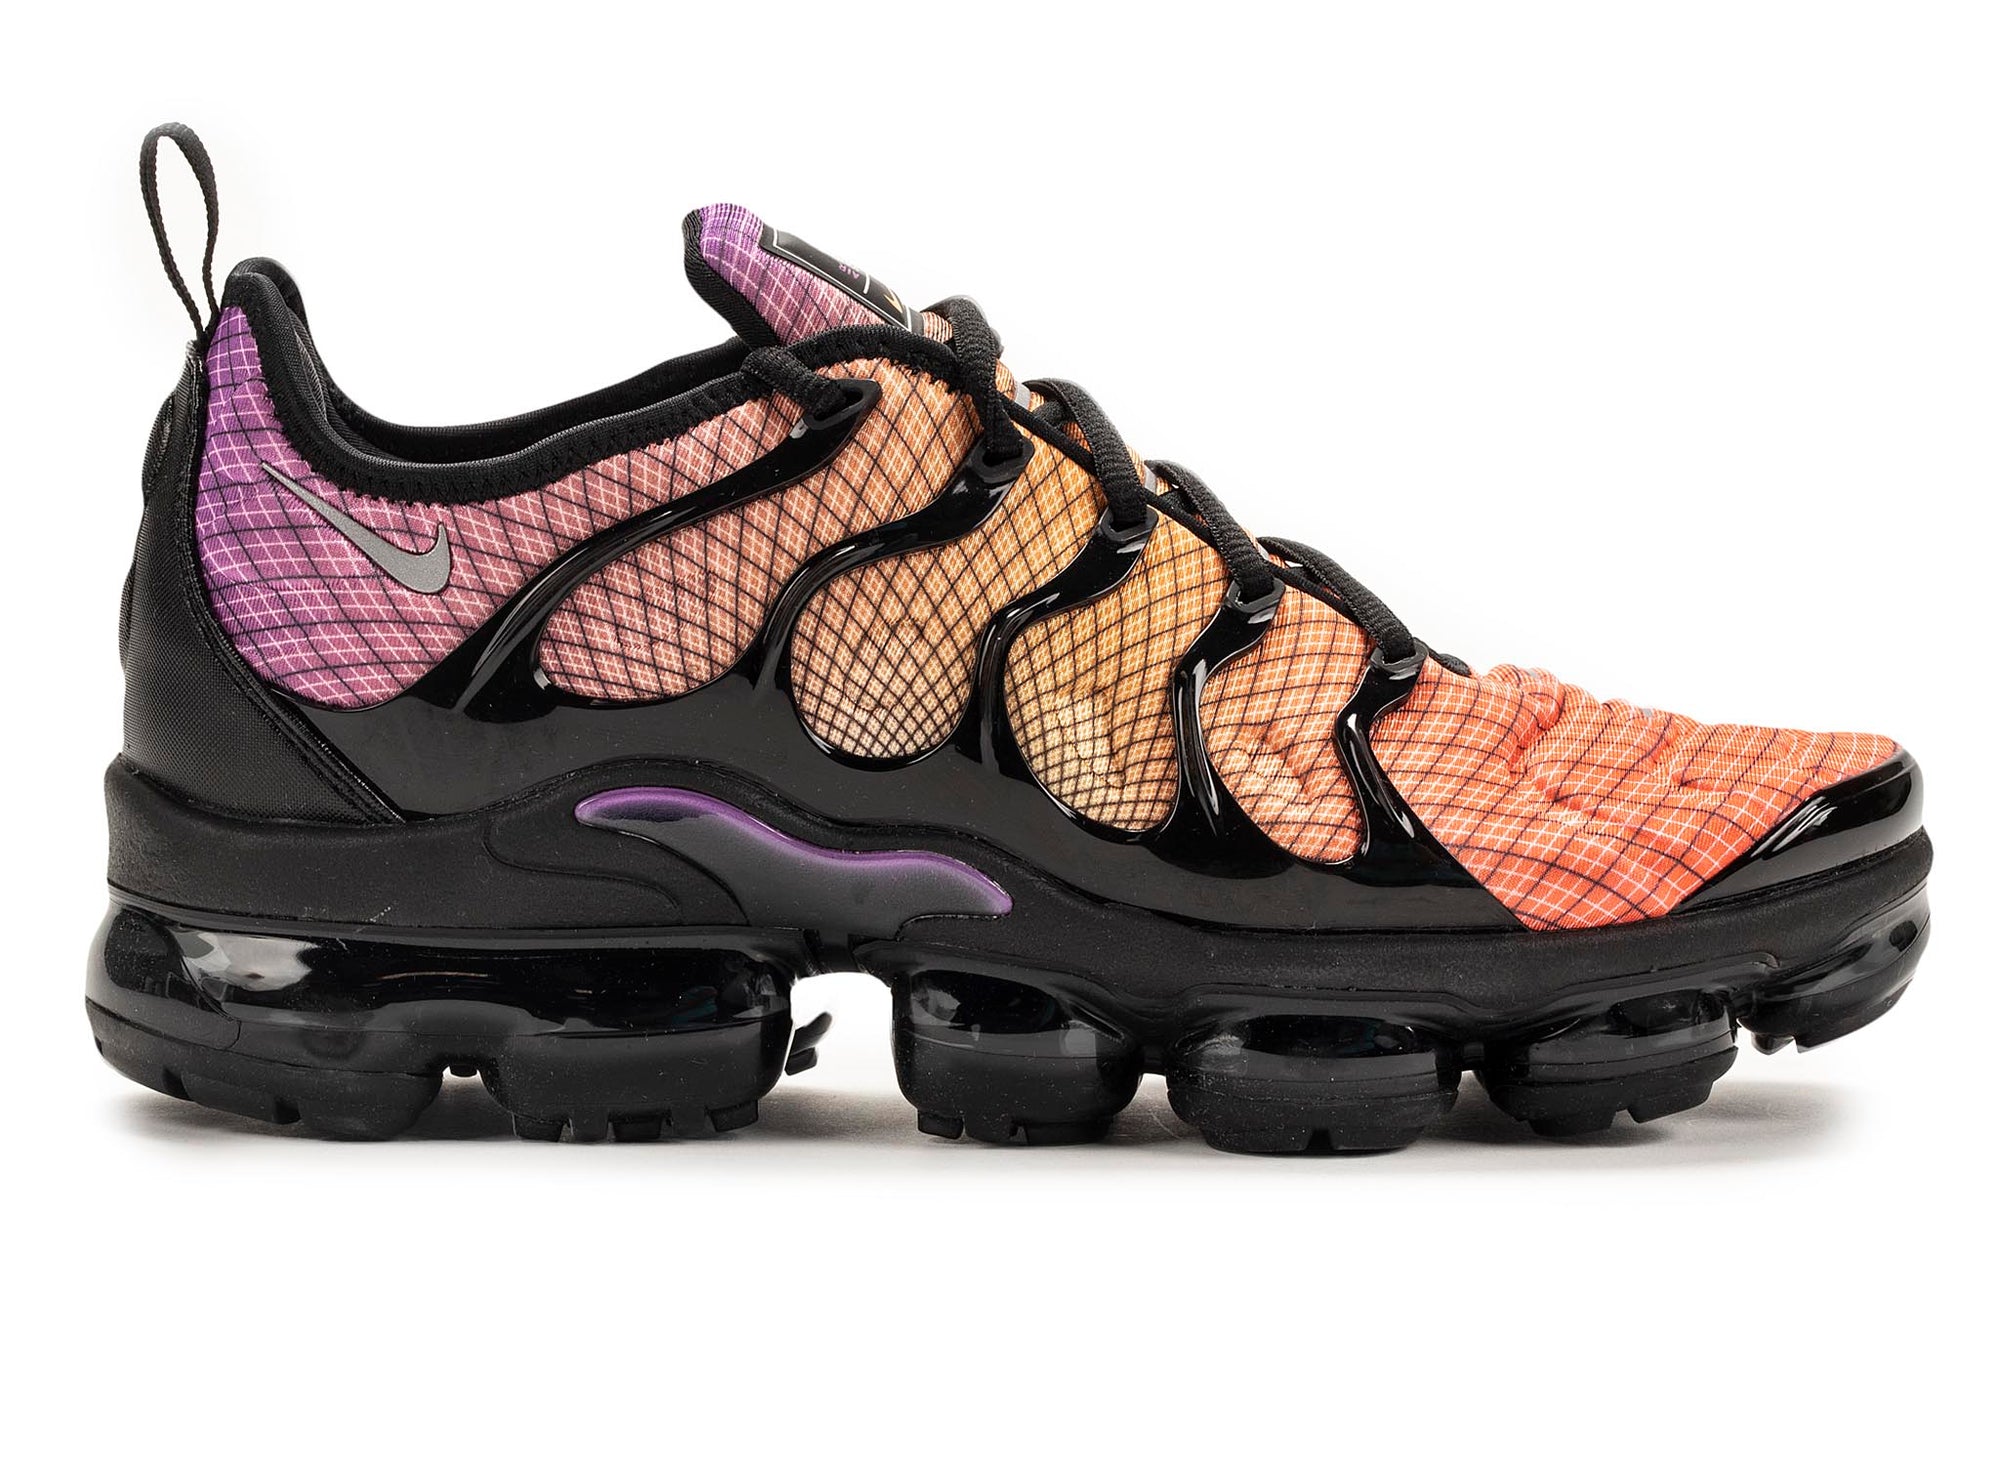 Nike Air VaporMax Plus Available in Hyper Violet Sneaker